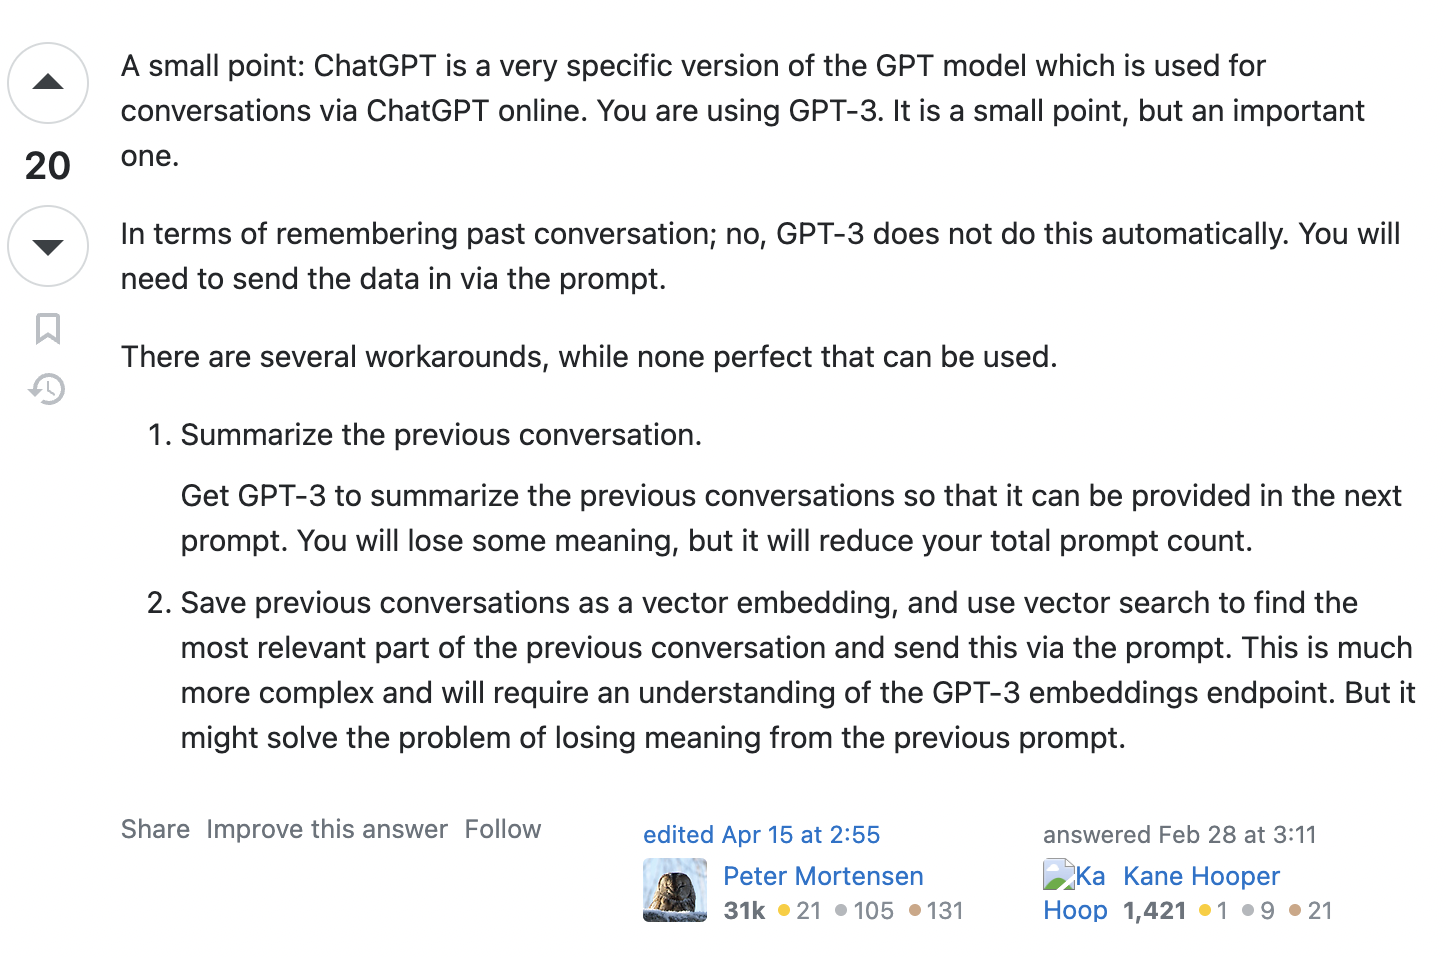 Screenshot of an answer to the question, with the content: A small point: ChatGPT is a very specific version of the GPT model which is used for conversations via ChatGPT online. You are using GPT-3. It is a small point, but an important one. In terms of remembering past conversation; no, GPT-3 does not do this automatically. You will need to send the data in via the prompt. There are several workarounds, while none perfect that can be used. Summarize the previous conversation. Get GPT-3 to summarize the previous conversations so that it can be provided in the next prompt. You will lose some meaning, but it will reduce your total prompt count. Save previous conversations as a vector embedding, and use vector search to find the most relevant part of the previous conversation and send this via the prompt. This is much more complex and will require an understanding of the GPT-3 embeddings endpoint. But it might solve the problem of losing meaning from the previous prompt.